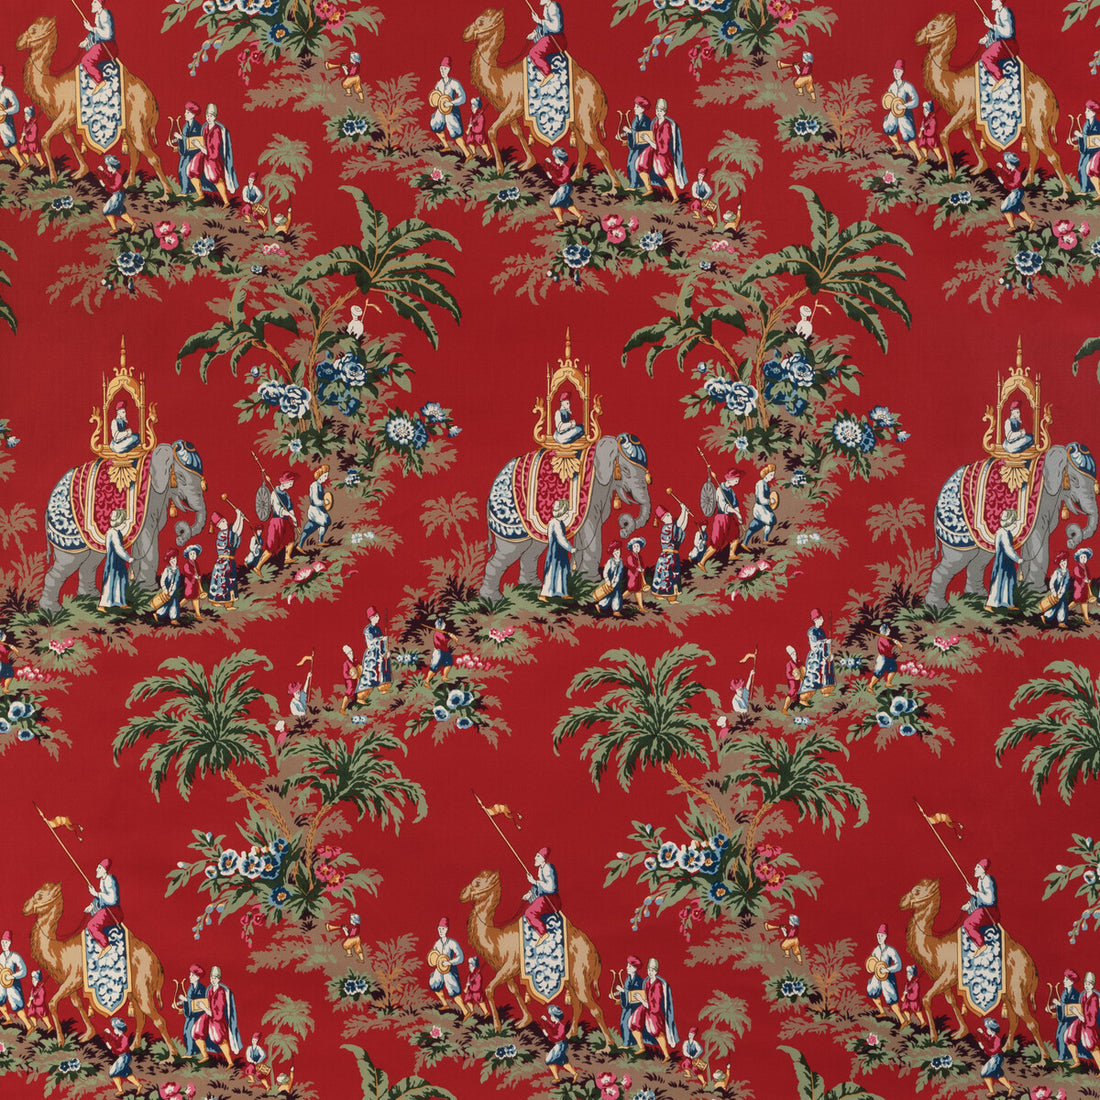 Beauport Promenade fabric in red color - pattern 8024104.19.0 - by Brunschwig &amp; Fils in the La Menagerie collection